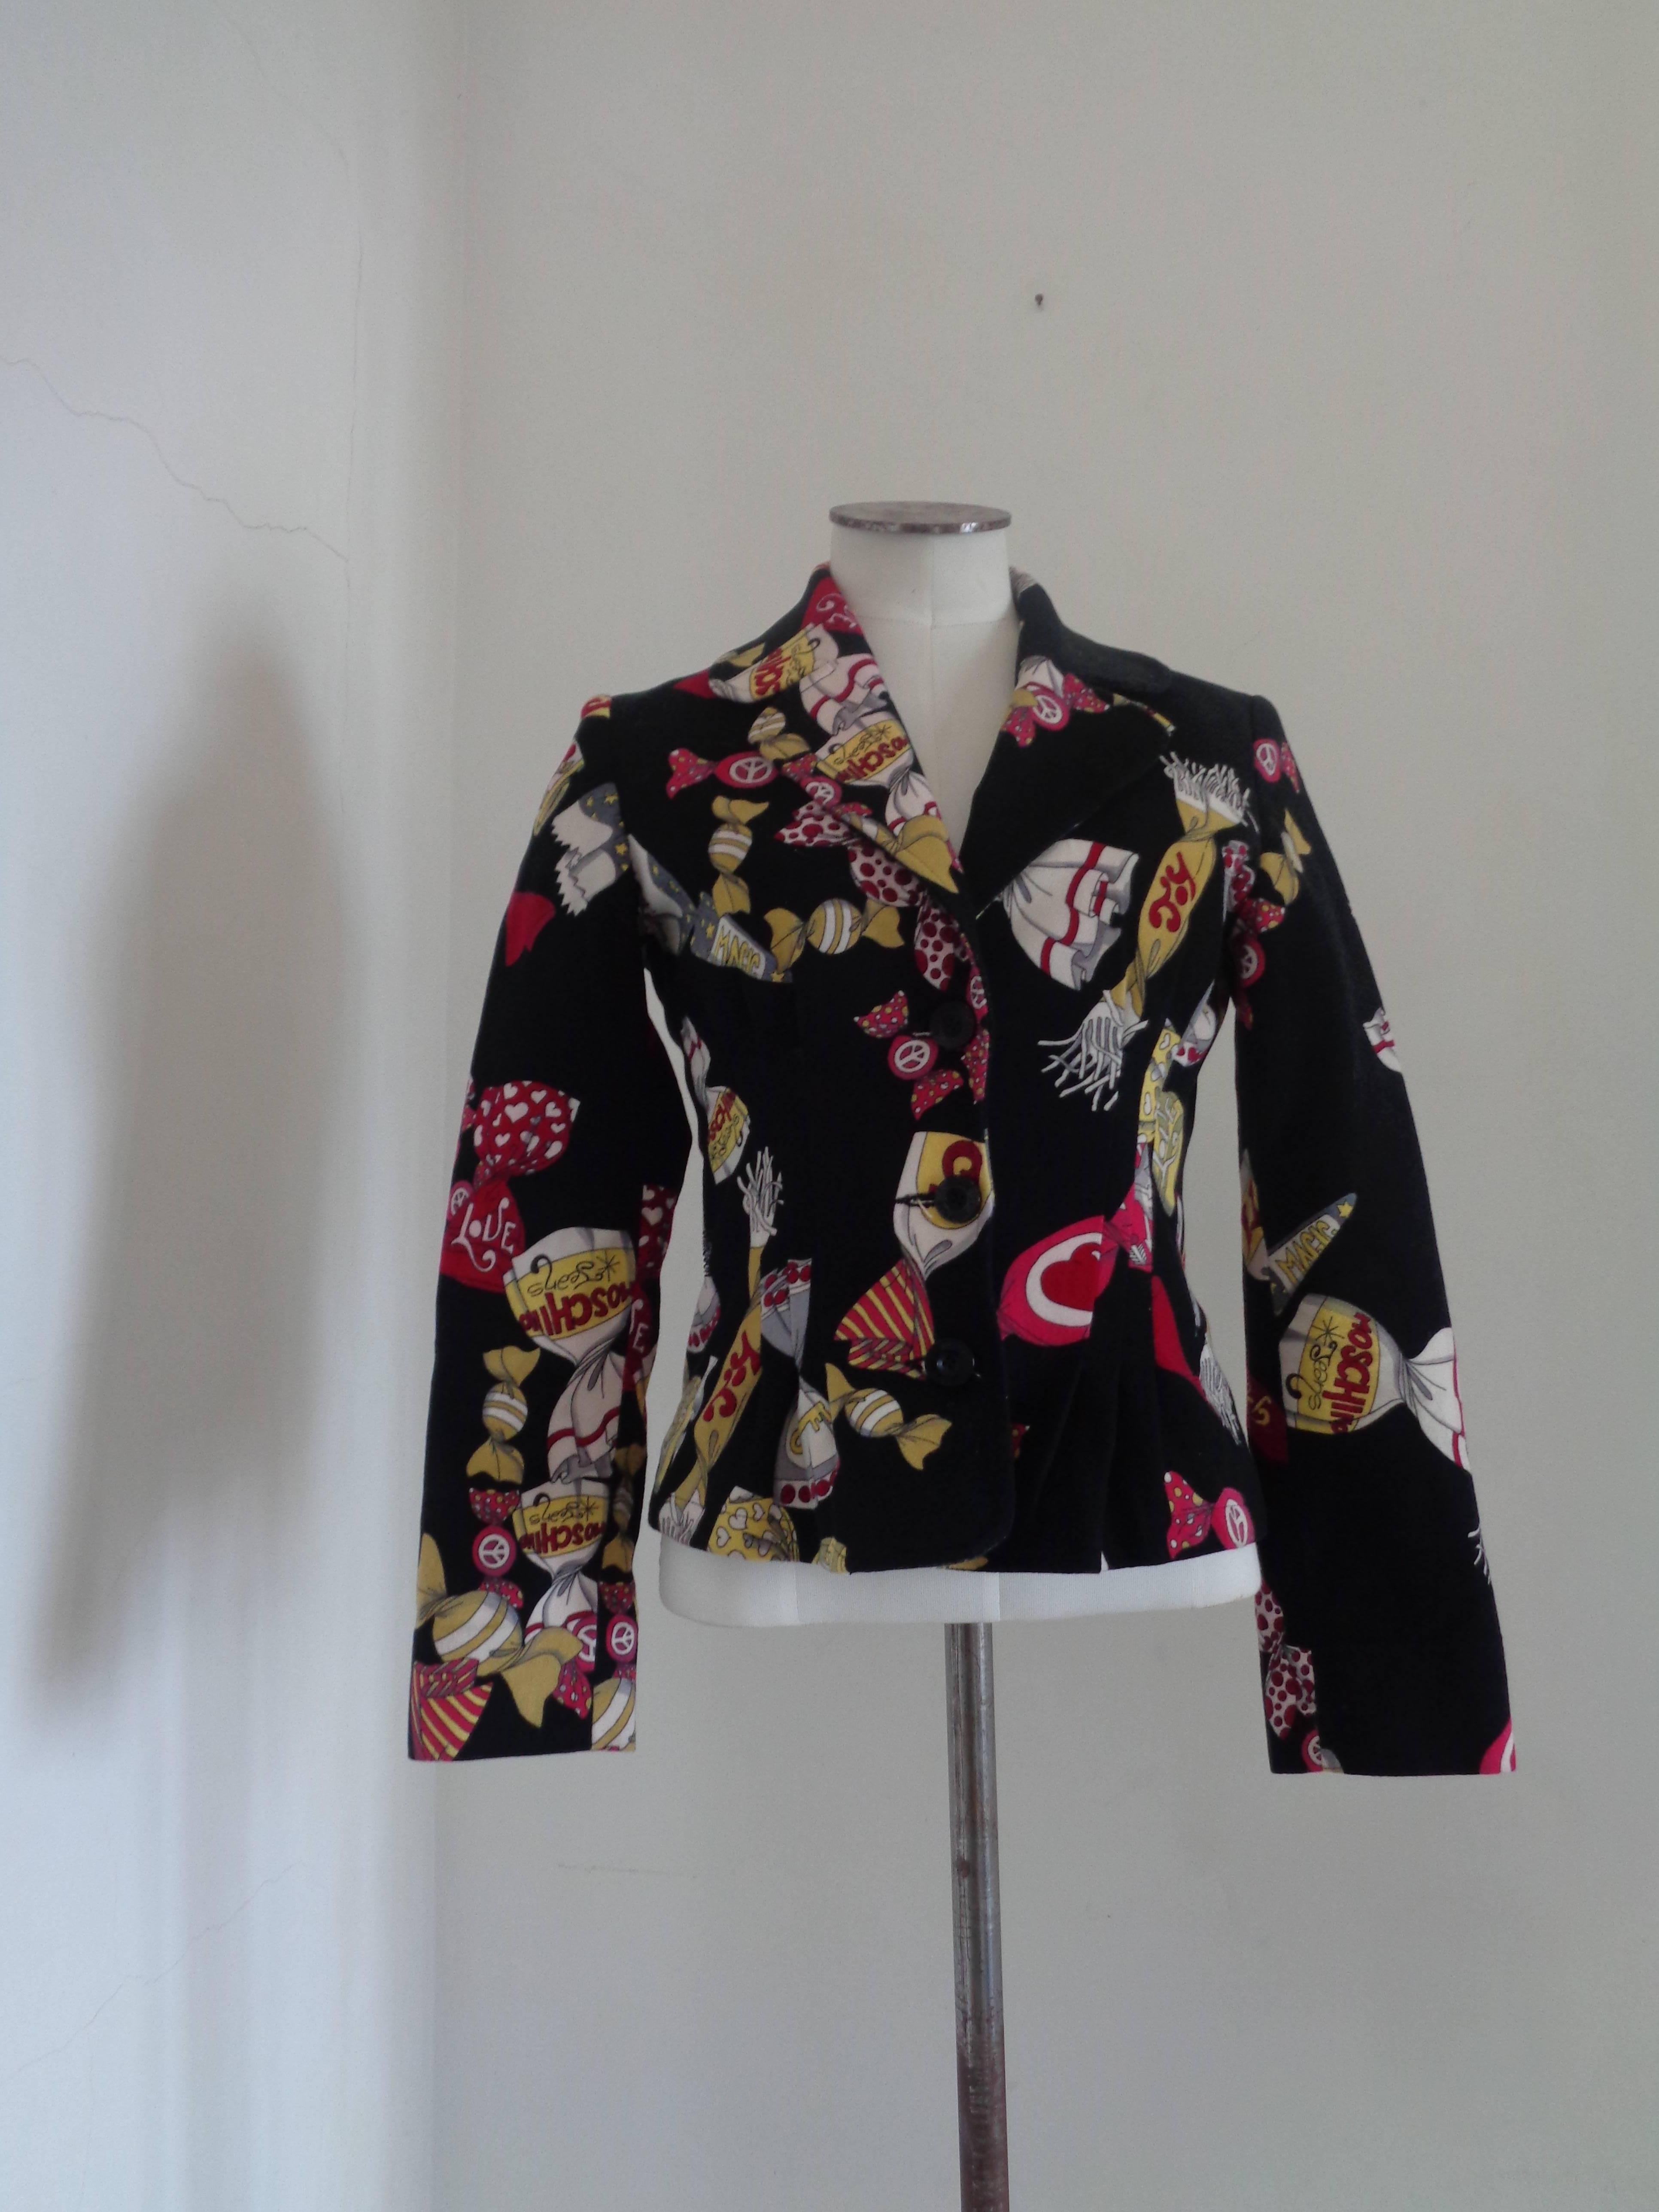 Moschino Jeans Candies Jacket

Candies all over
Totally made in italy in italian size range 40